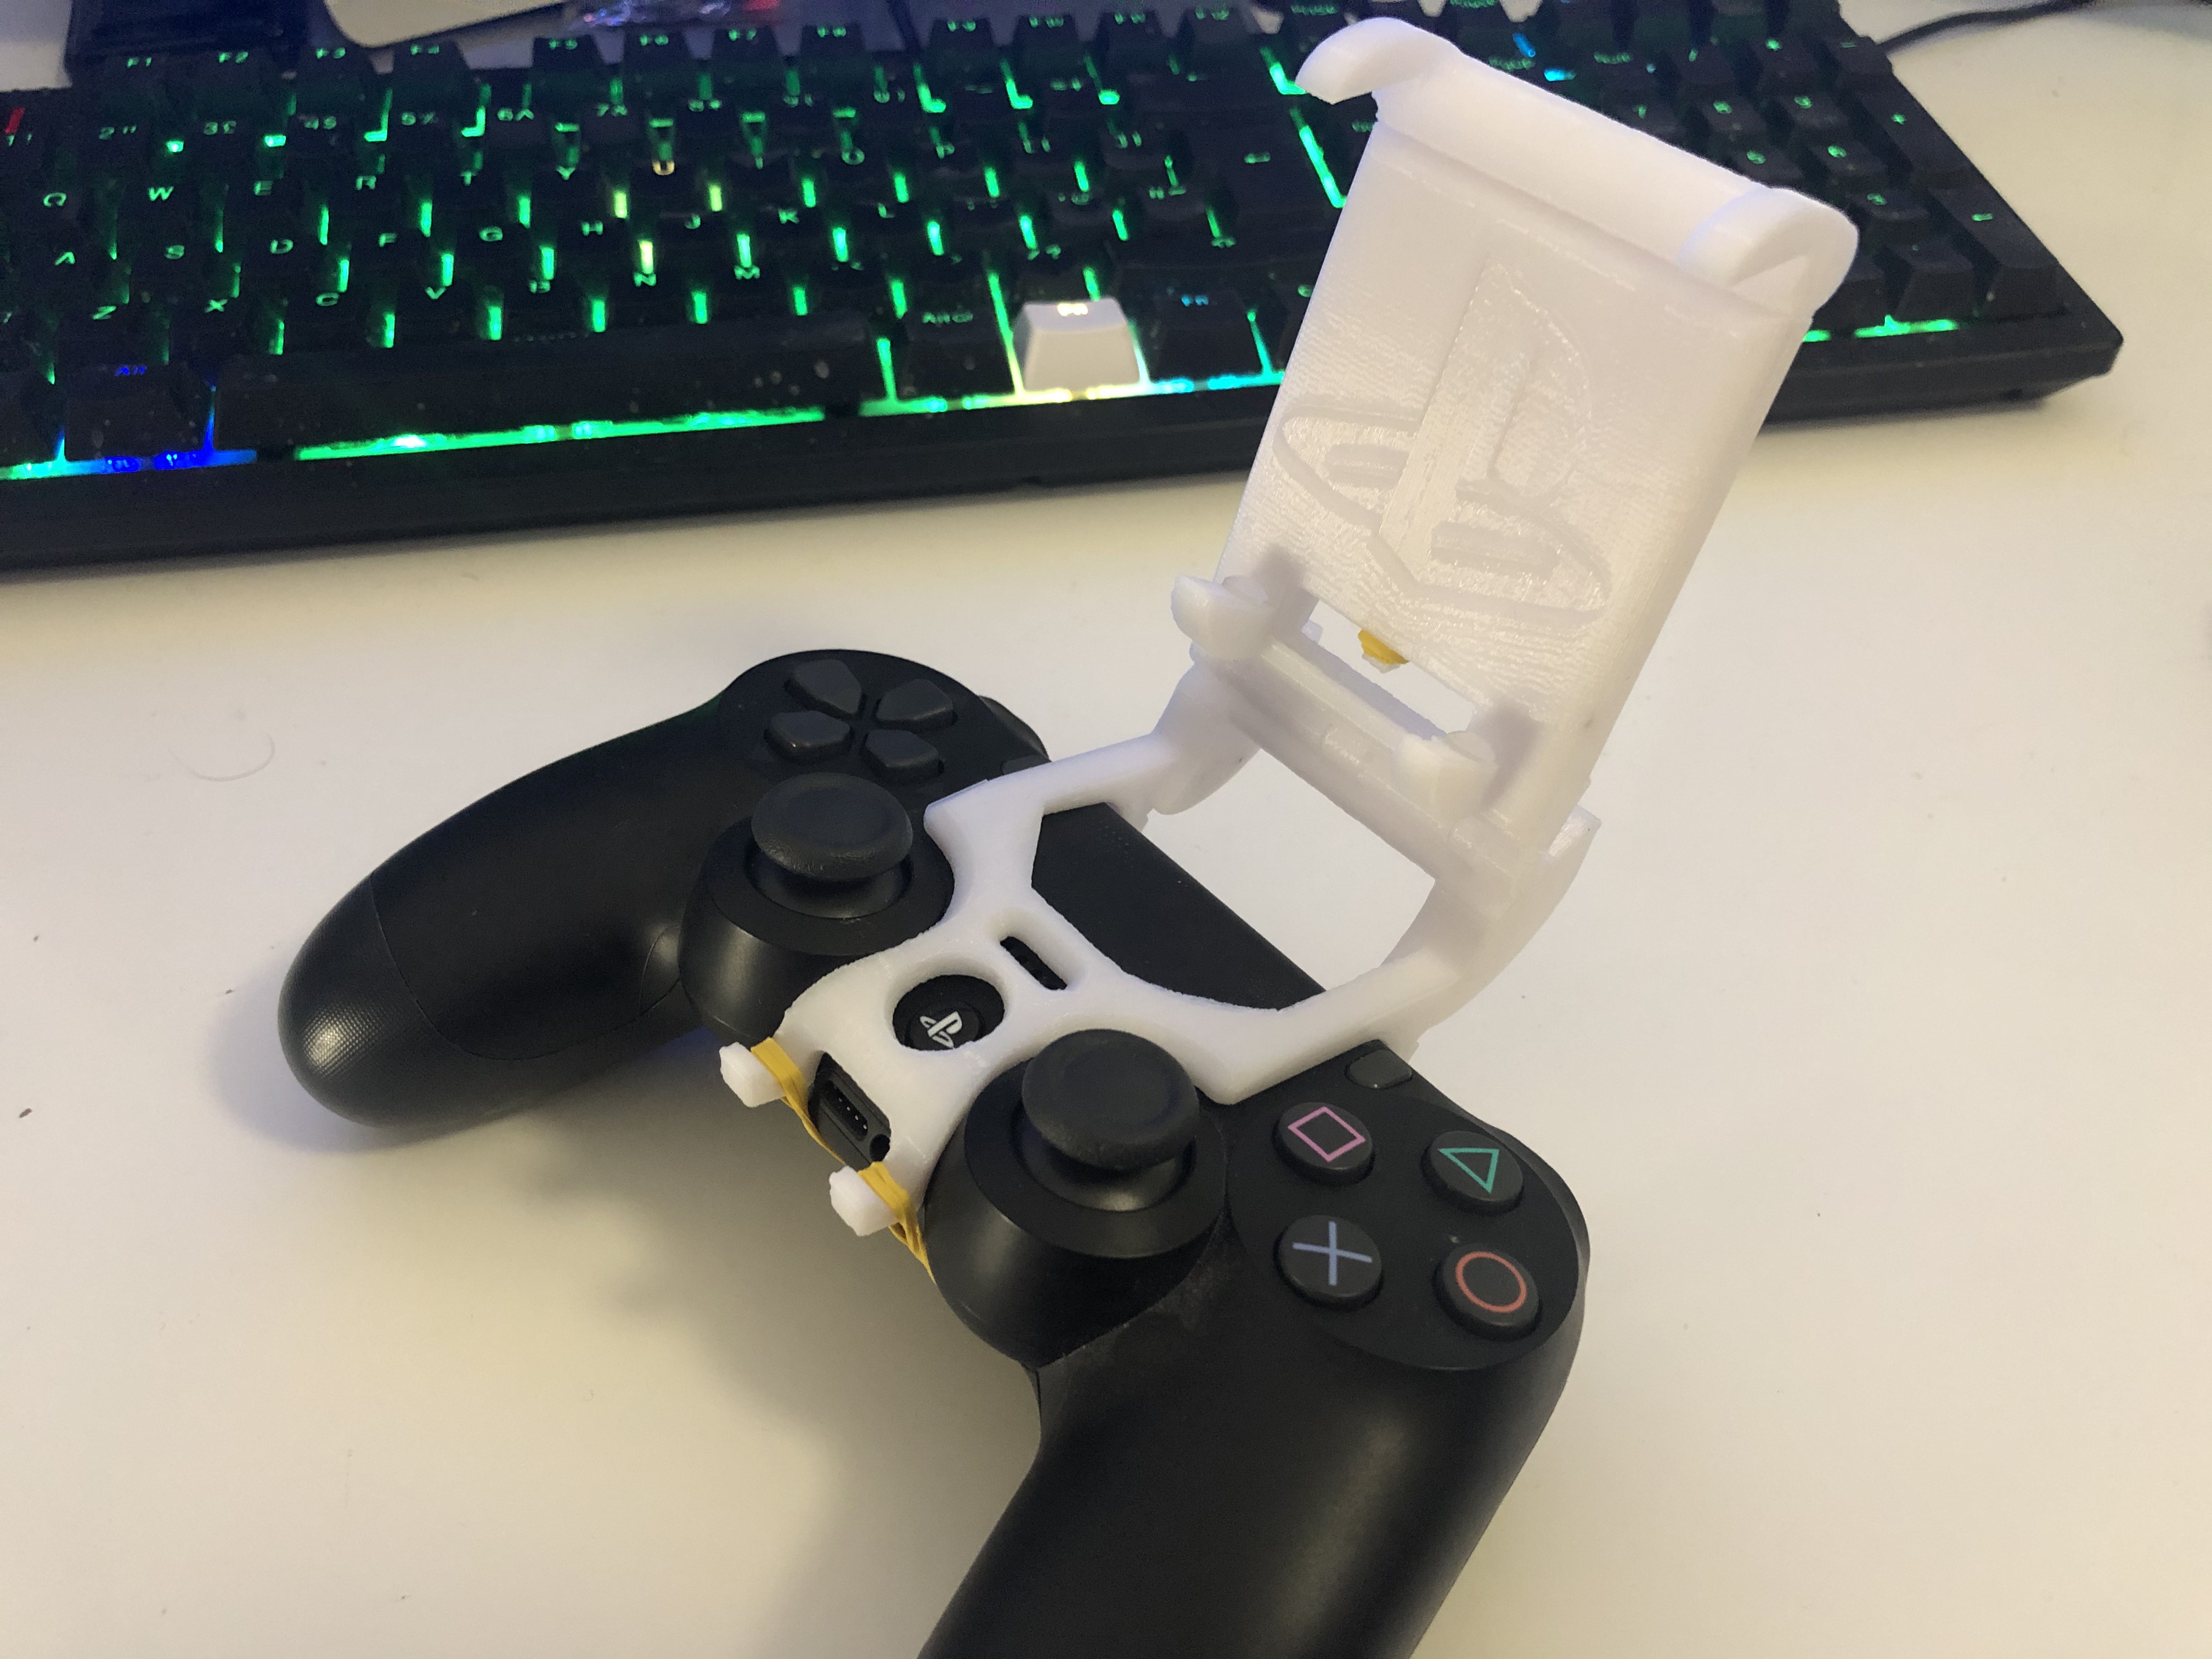 Makes Of Ps4 Android Universal Mount Clip Holder Smartphone Dualshock 4 V2 Rev 2 Tested Branded Playstation New Reinforcre V By Jangxx Thingiverse